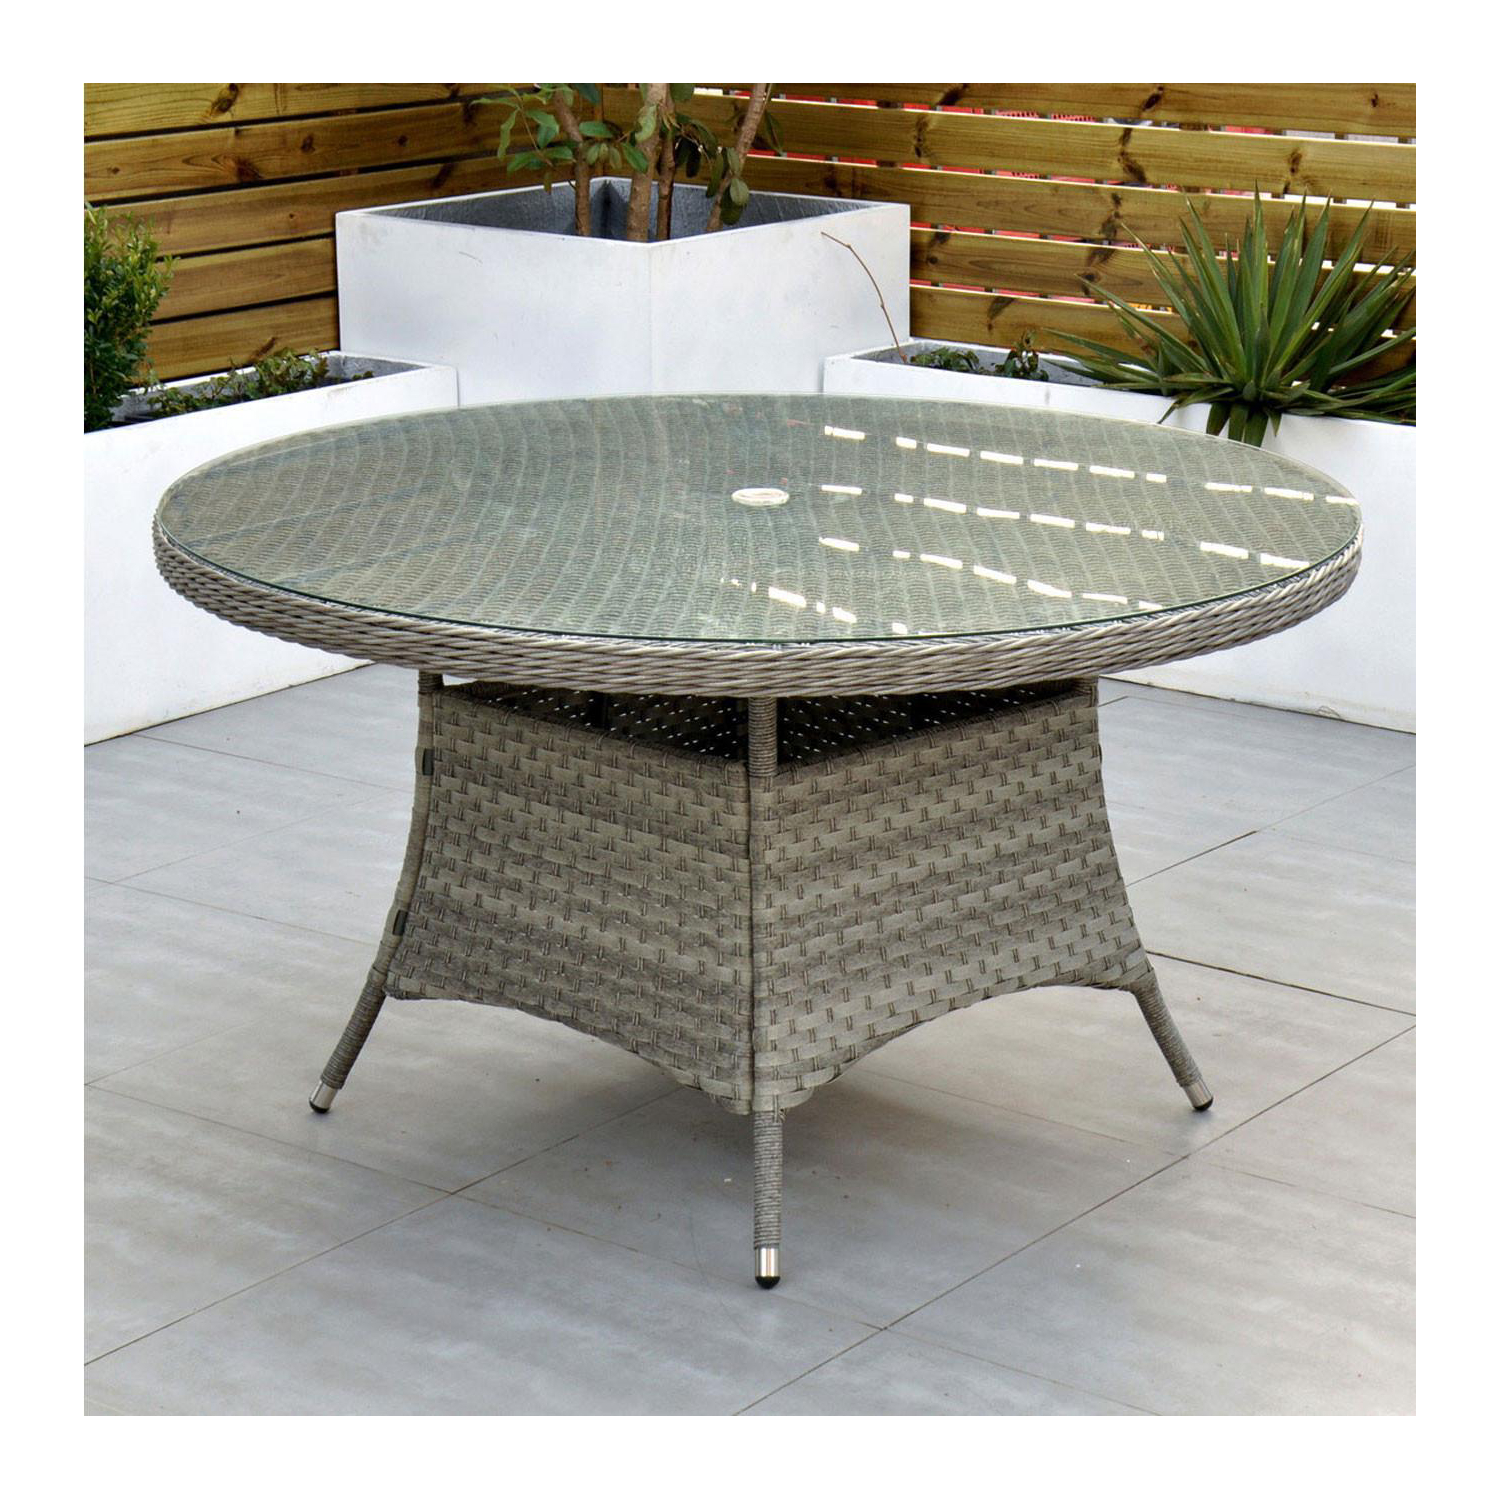 Bali 6 Seat Dining Set with 135cm Round Table